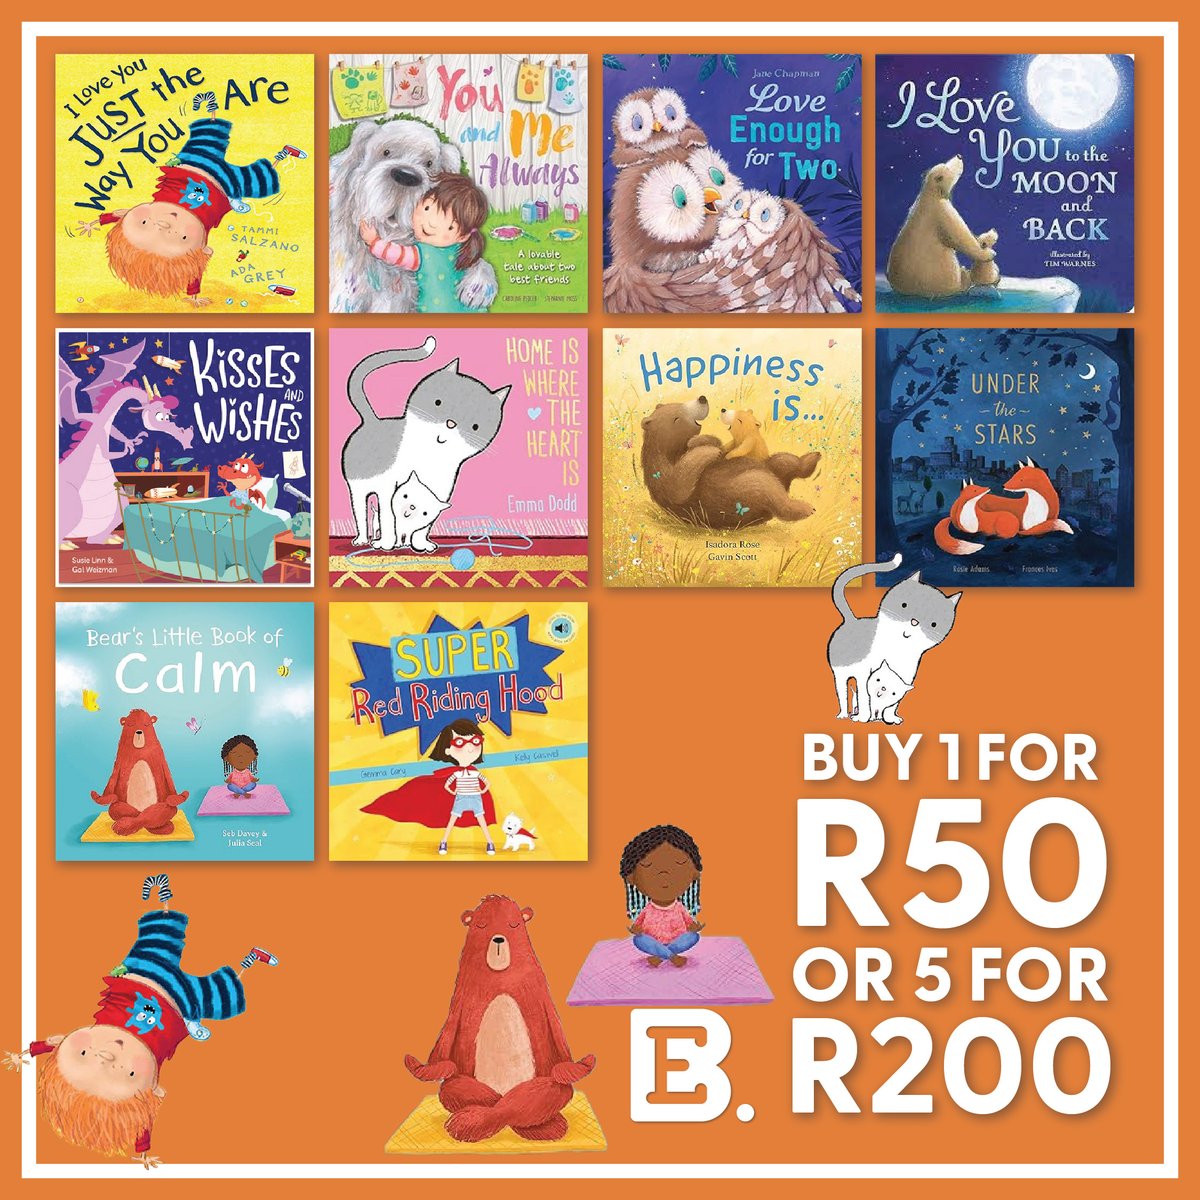 Children’s Multibuy Promo now on at @ExclusiveBooks 
Buy 1 for R50 or 5 for R200!
Offer valid 1 - 31 May.
While stocks last.
#IconicSandton #ExclusiveBooks